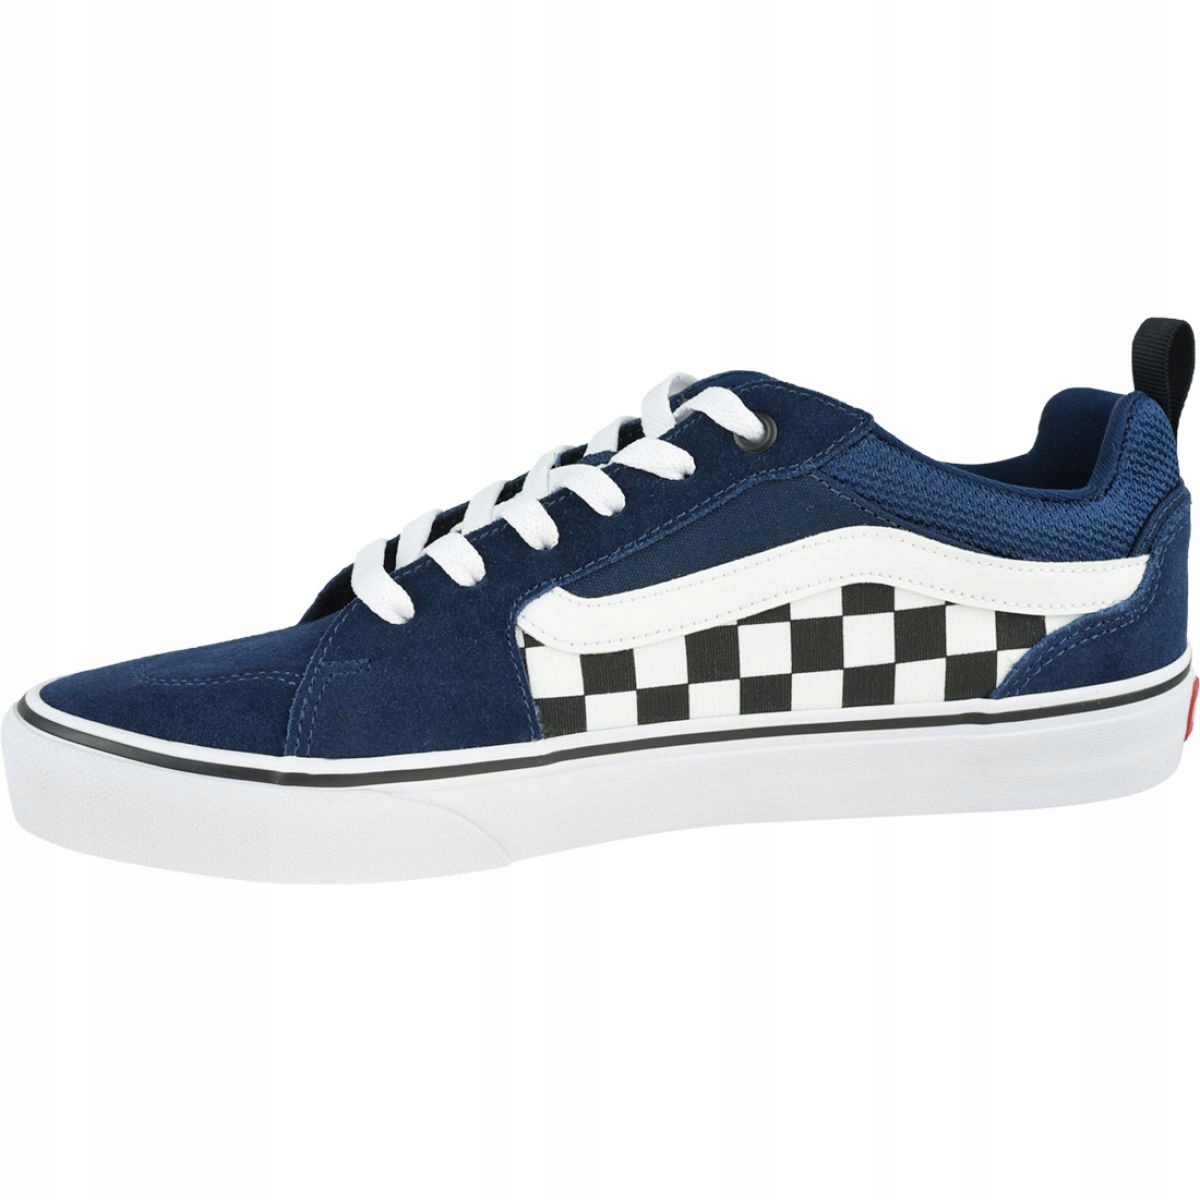 Vans Mn Filmore M VN0A3MTJW7N1 shoes navy - KeeShoes